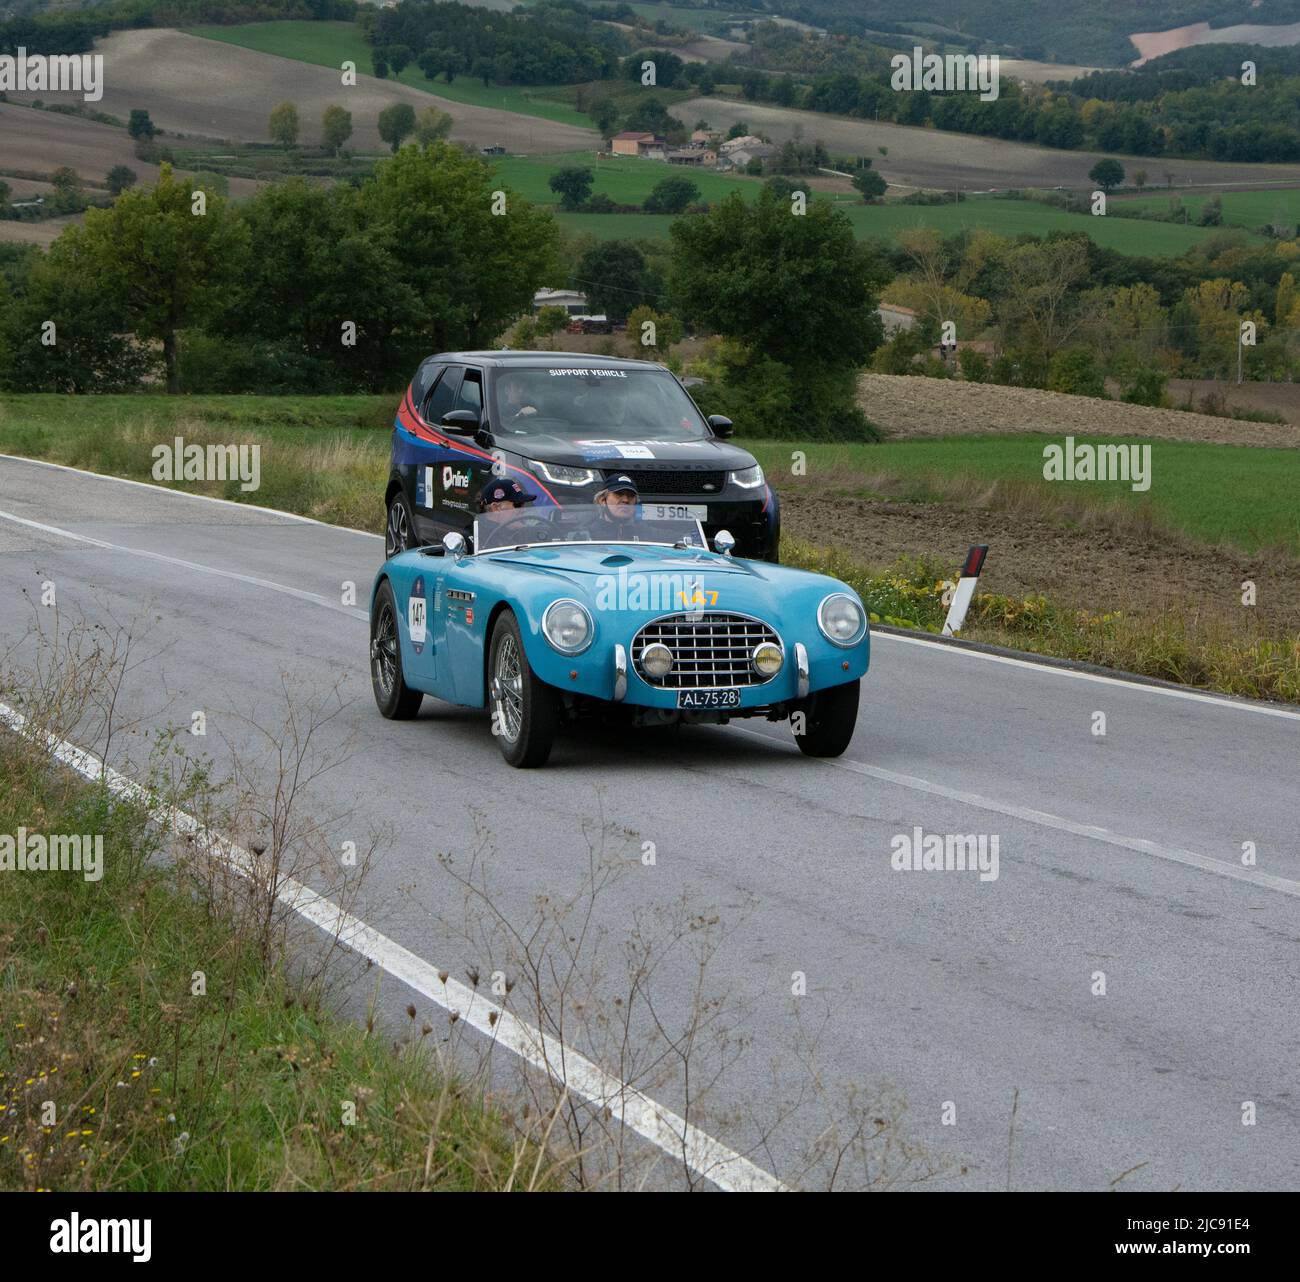 CAGLI , ITALY - OTT 24 - 2020 : TALBOT LAGO T26 GRAND SPORT 1949 1,65 1500 1949 on an old racing car in rally Mille Miglia 2020 the famous italian his Stock Photo